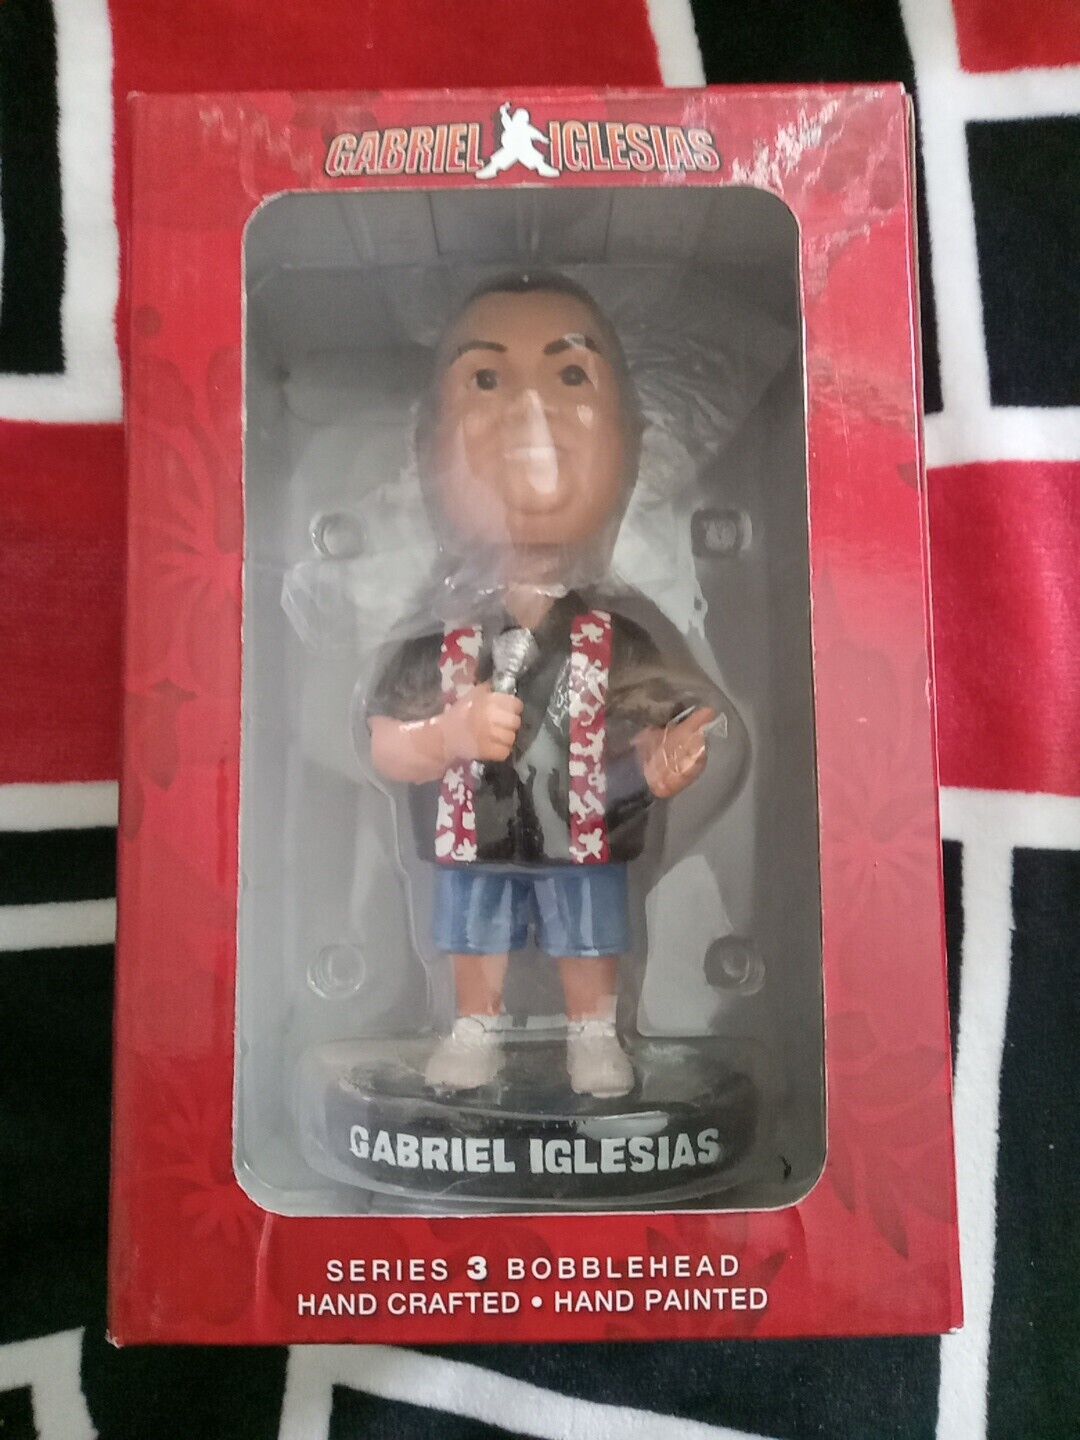  Gabriel Iglesias Fluffy Series 3 Bobblehead Hand Crafted 2012 Handpainted New